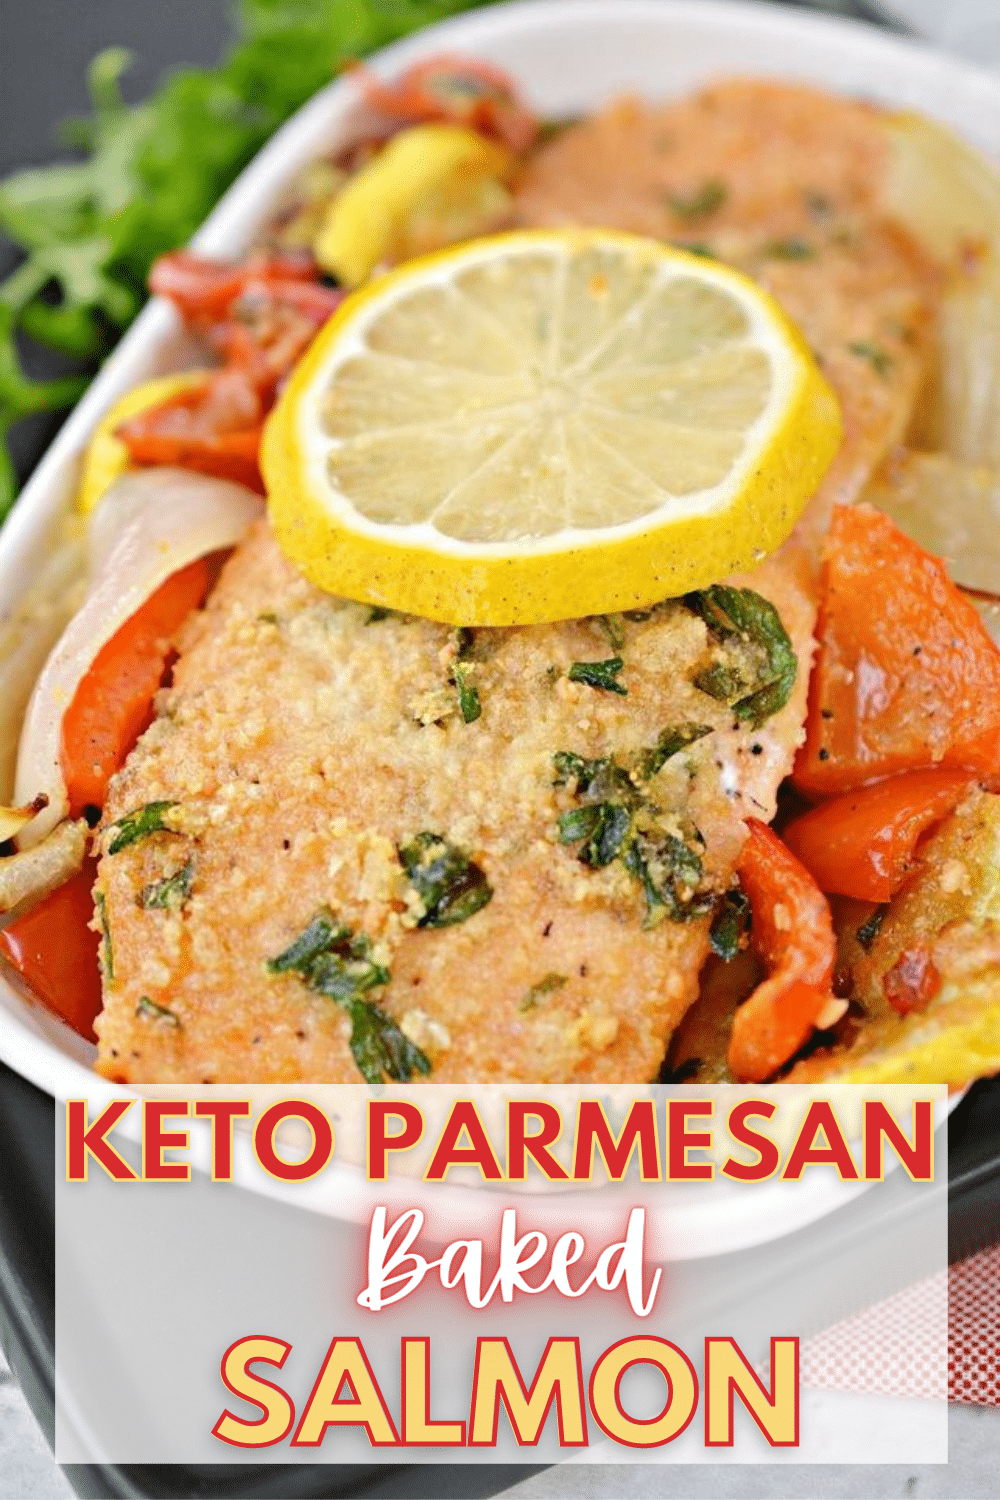 Keto Parmesan Crusted Baked Salmon is an easy and delicious sheet pan dinner the whole family will love. A low-carb friendly one-pan meal. #salmon #keto #sheetpandinner via @wondermomwannab